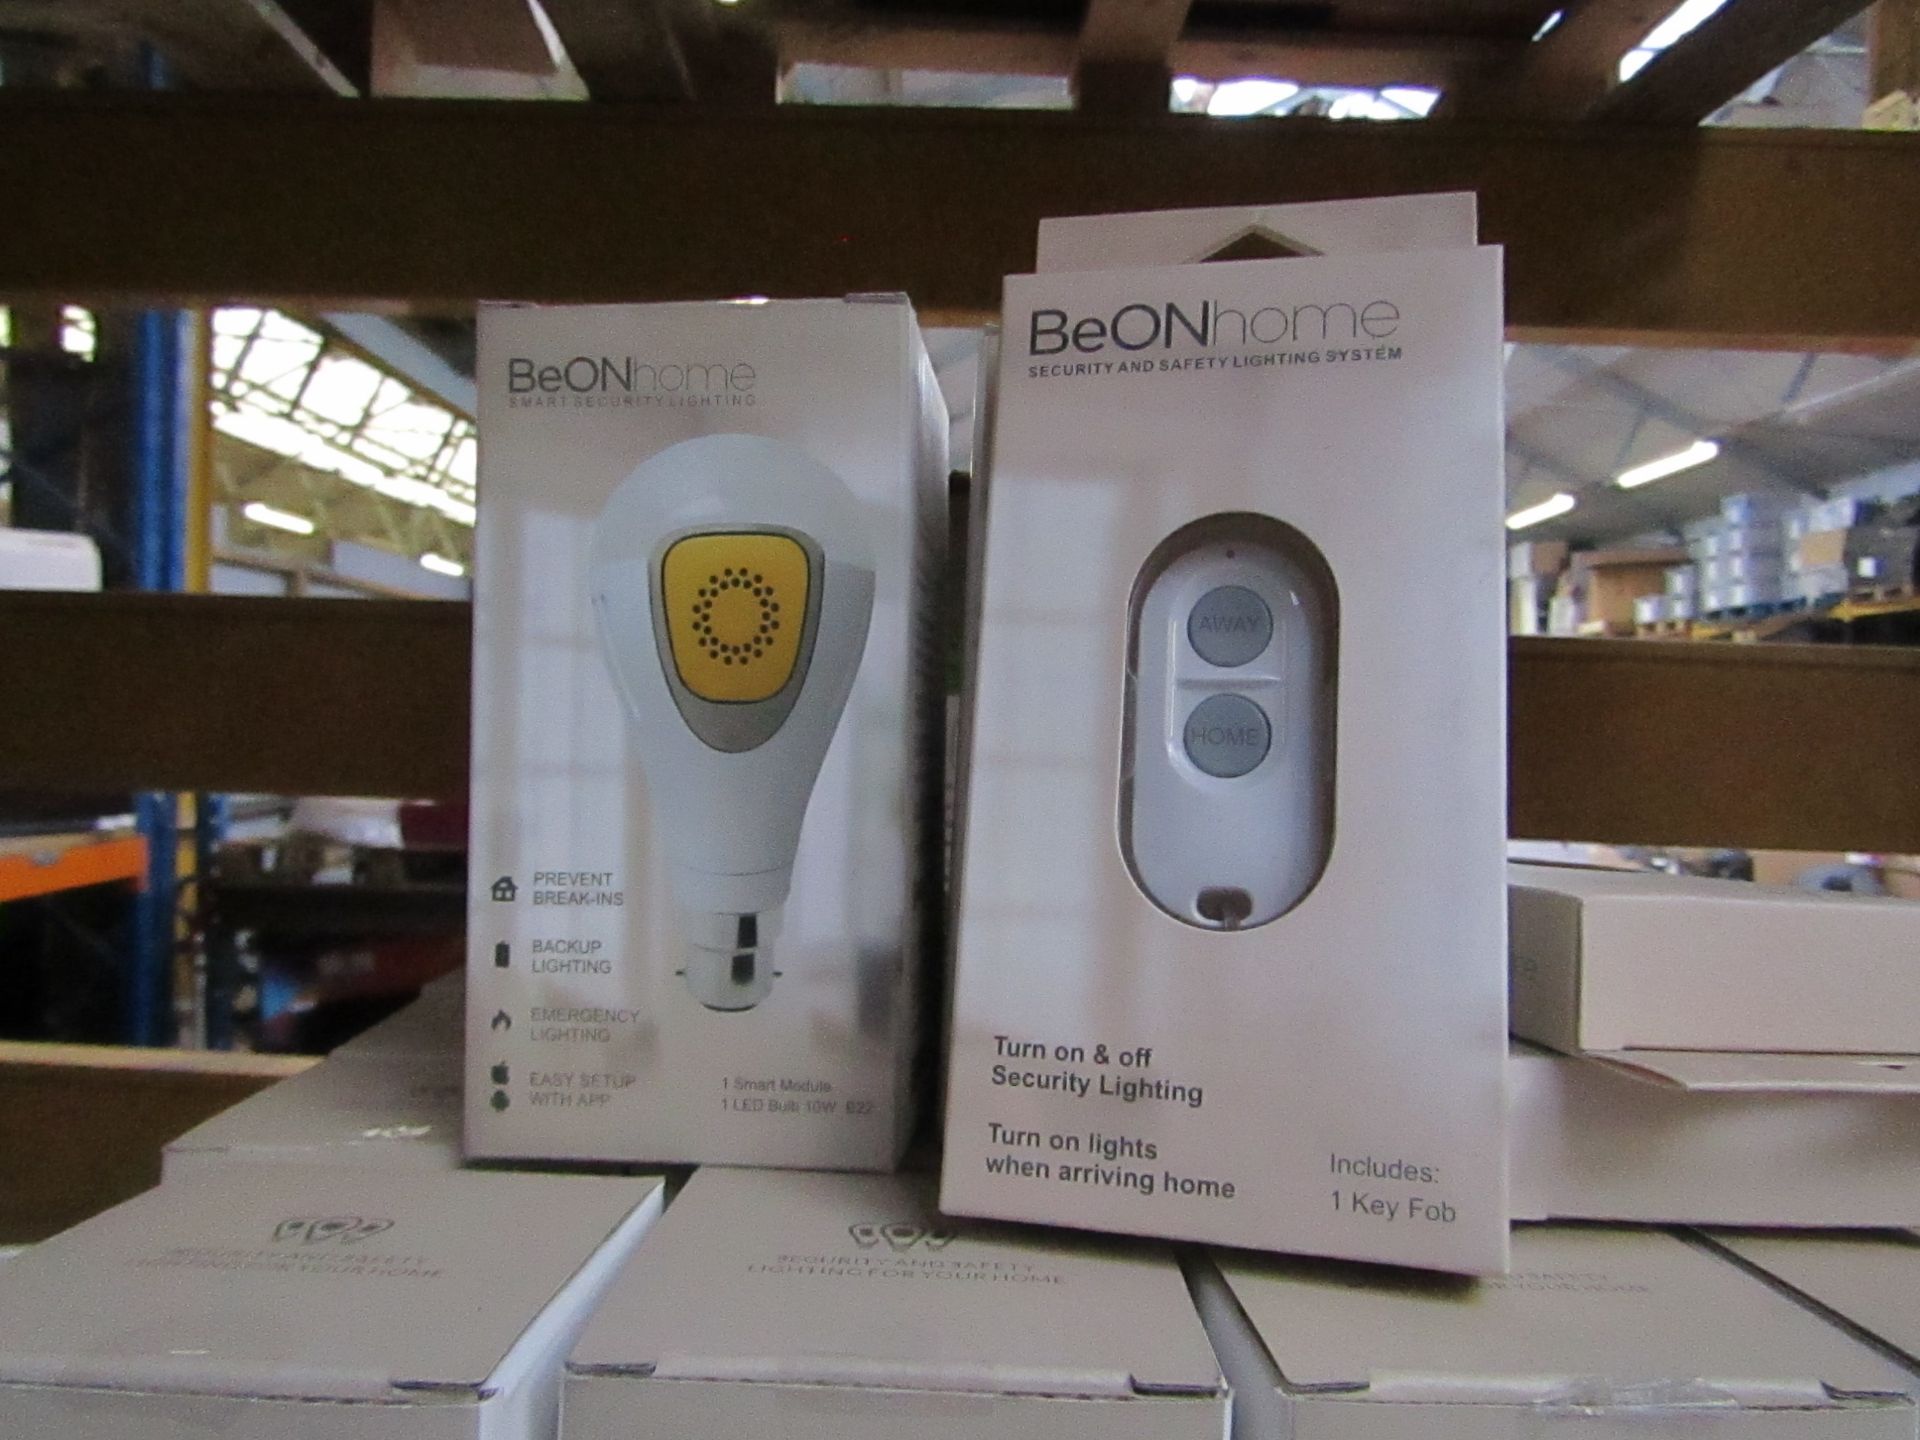 4x BeOn Home smart security light bulb with 1 remote control look unused and boxed